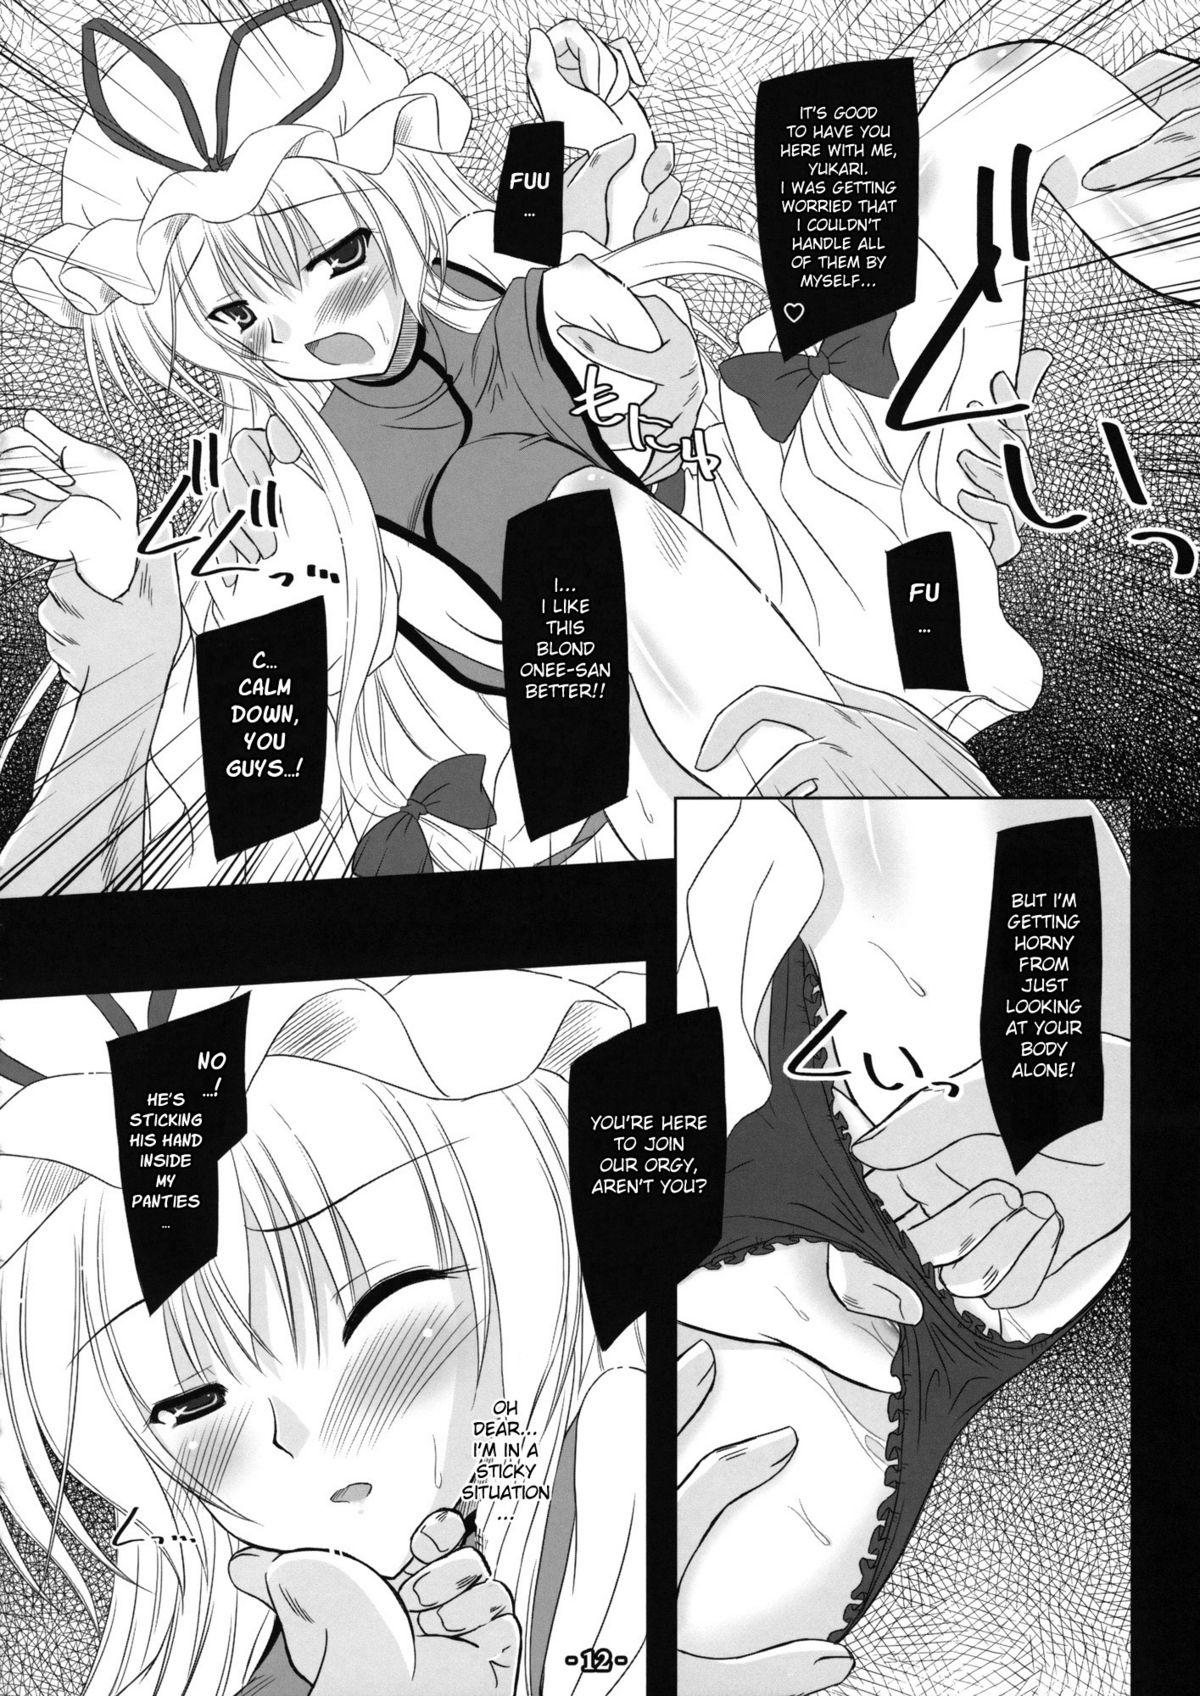 Fuck Pussy Musou Fuuin - Touhou project Femdom Pov - Page 11